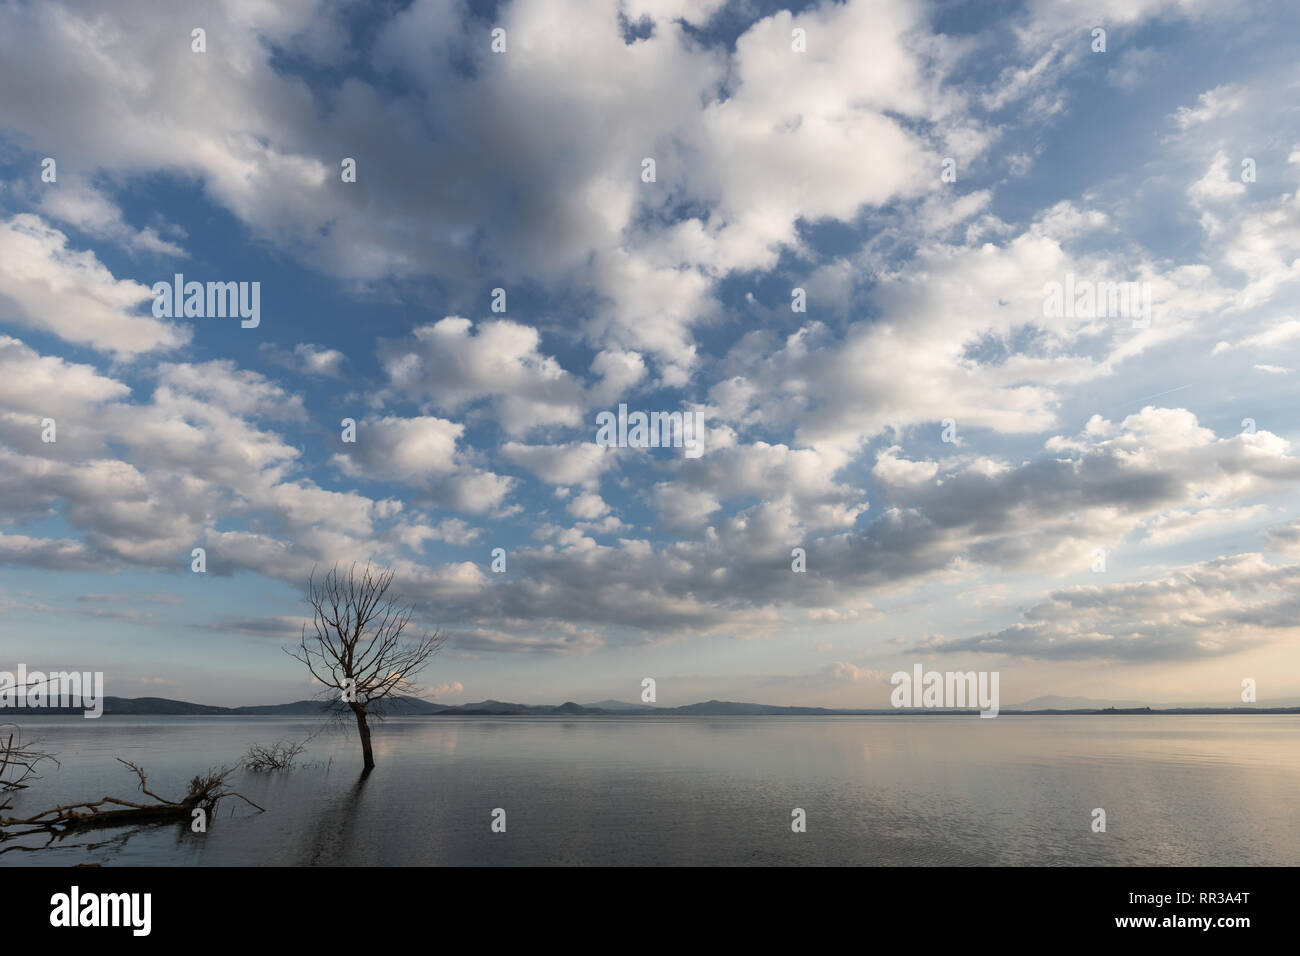 Beautiful wide angle view of a lake with an huge sky with clouds above skeletal trees Stock Photo